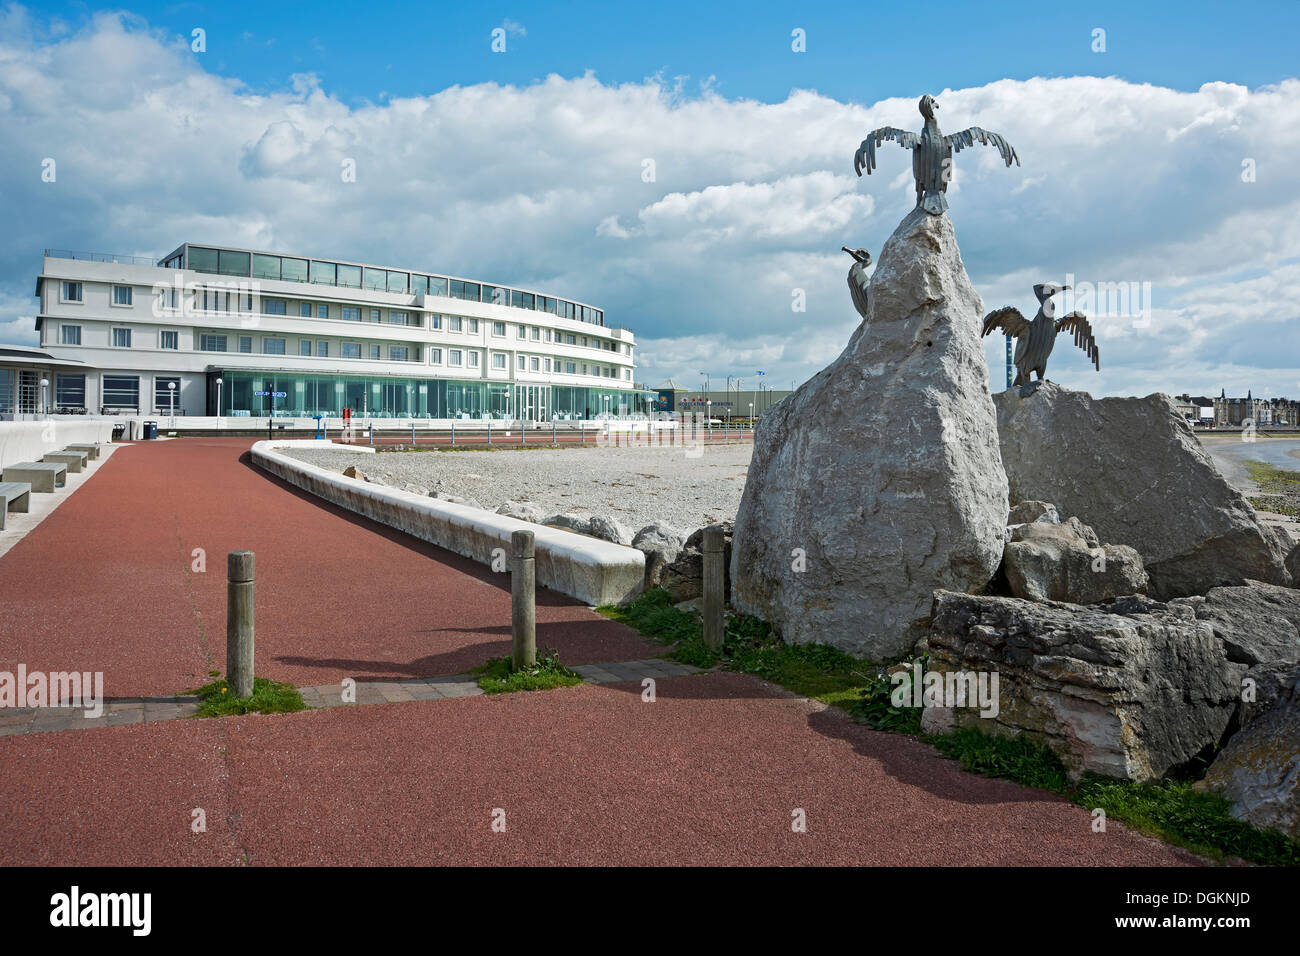 A view toward the Midland Hotel and promenade in Morecambe. Stock Photo